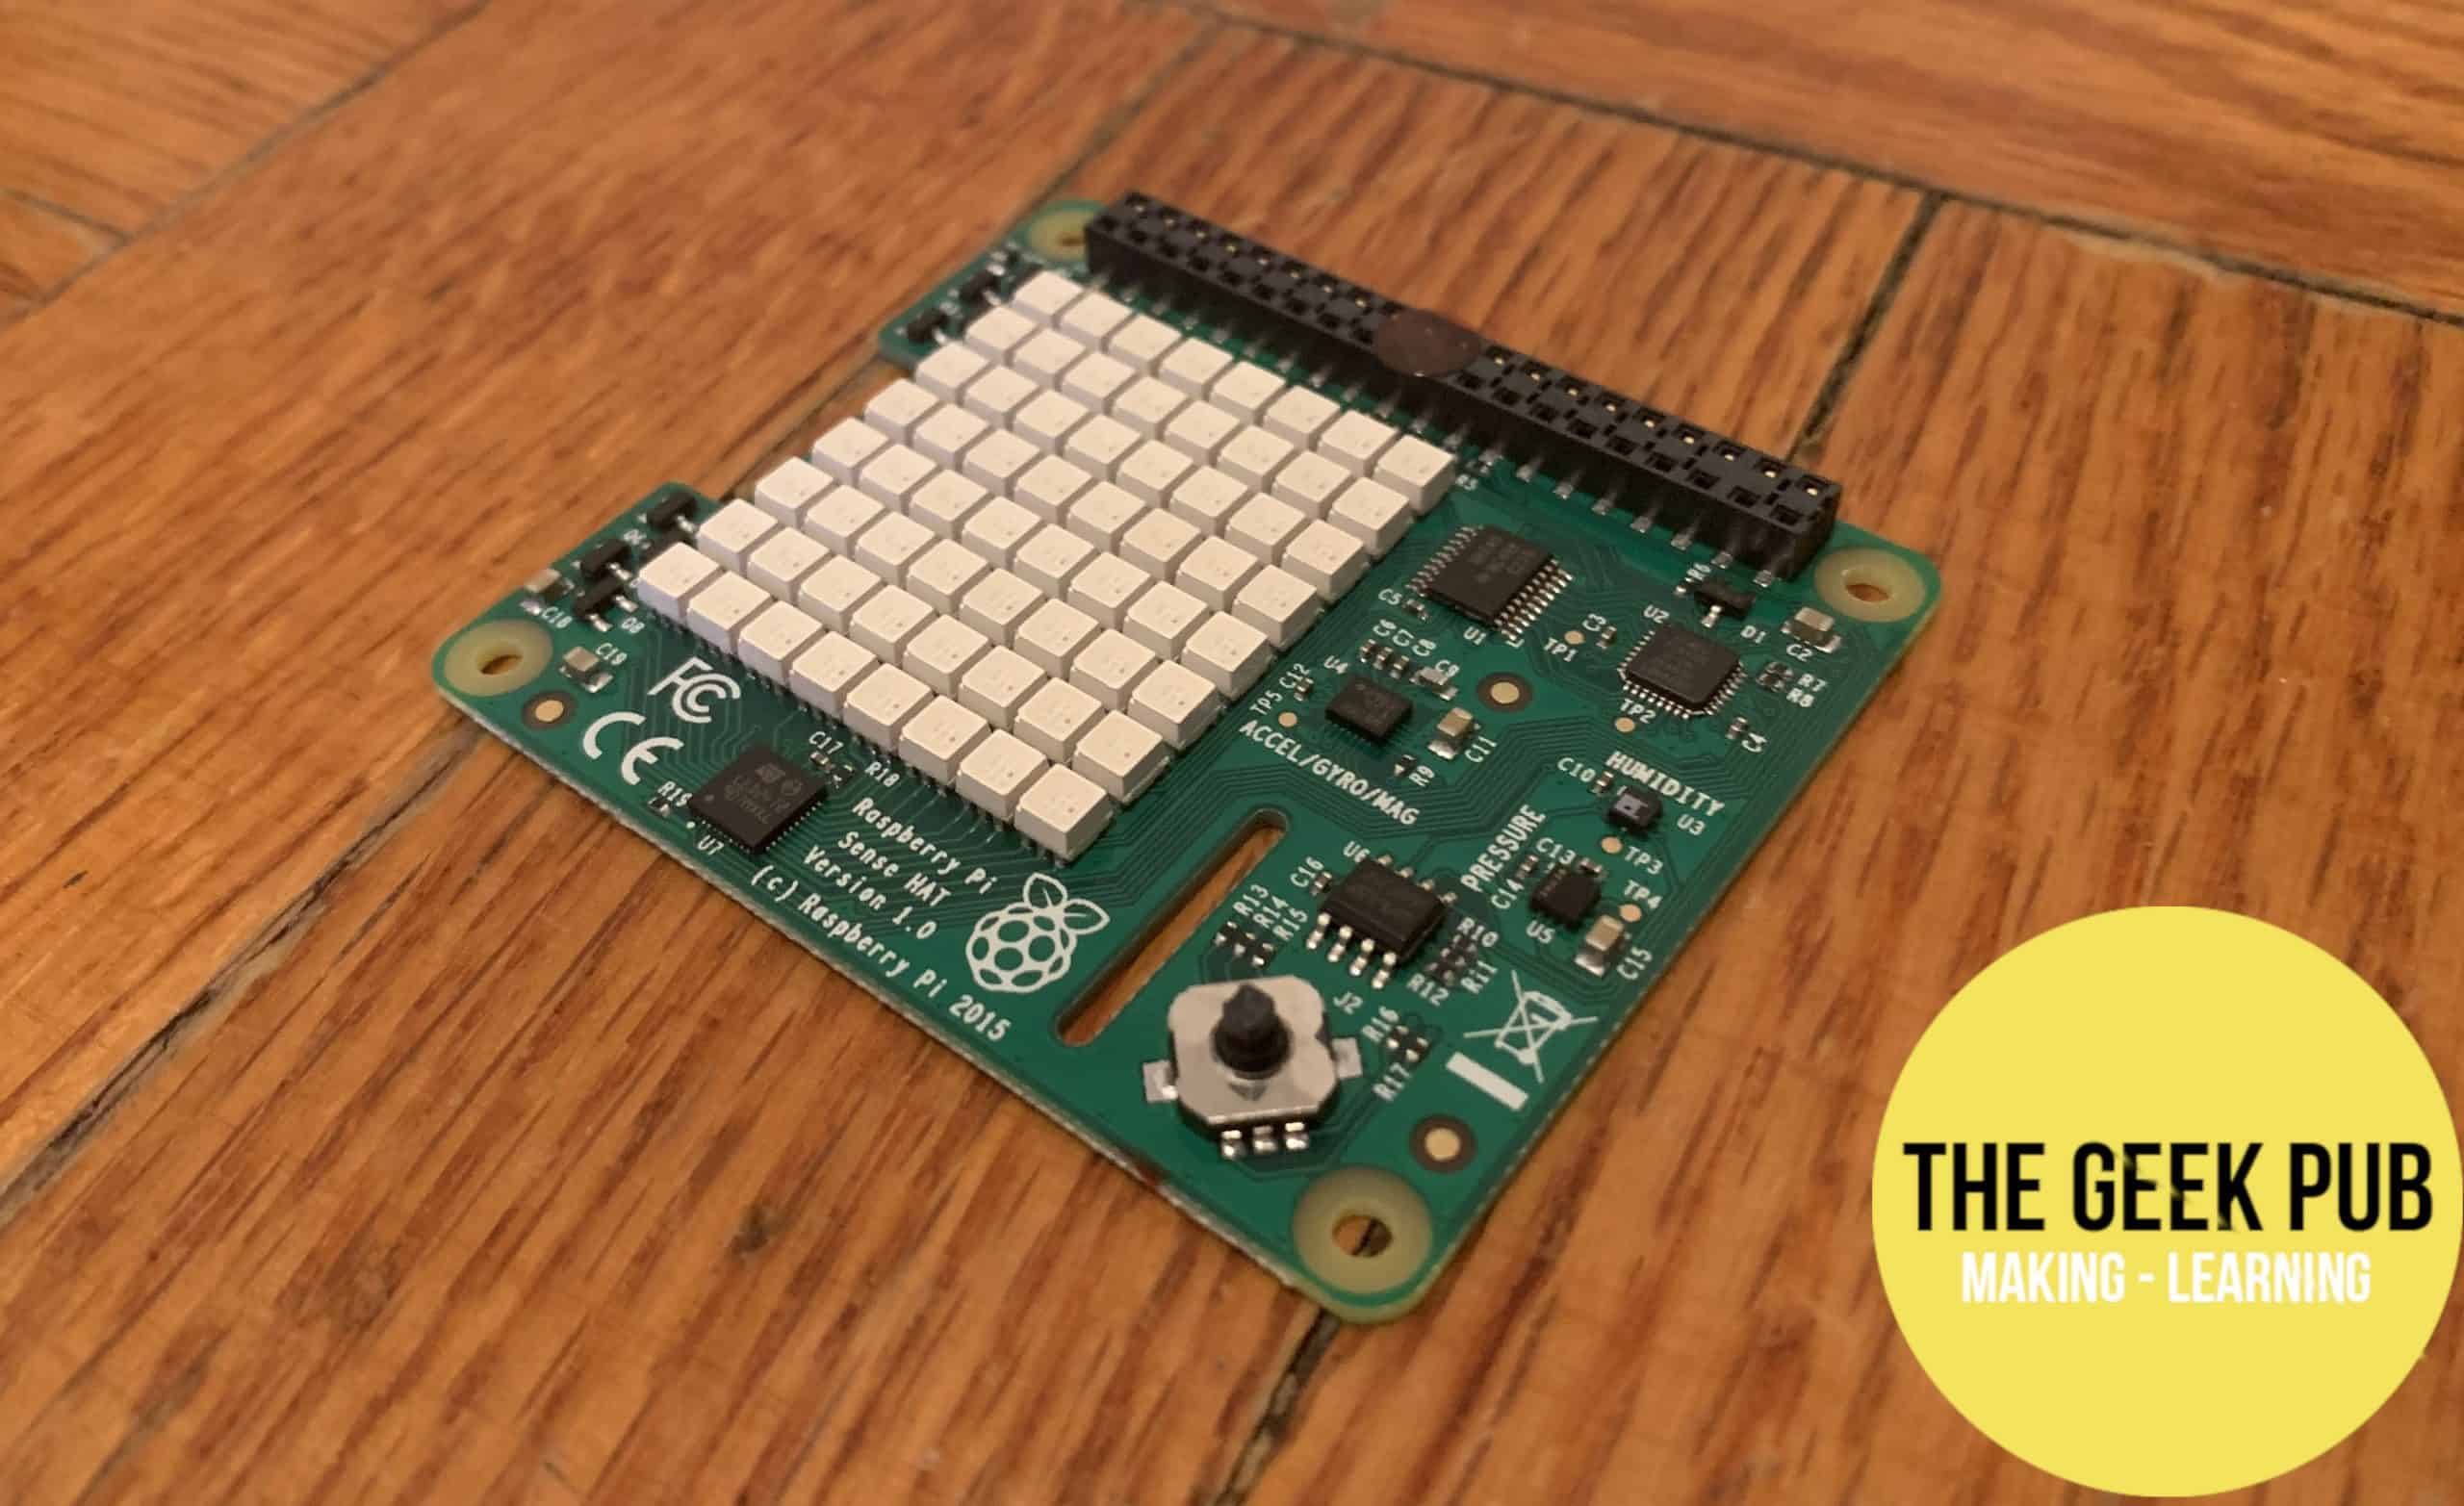 Another stop on our best GPIO tutorial journey: the sense HAT